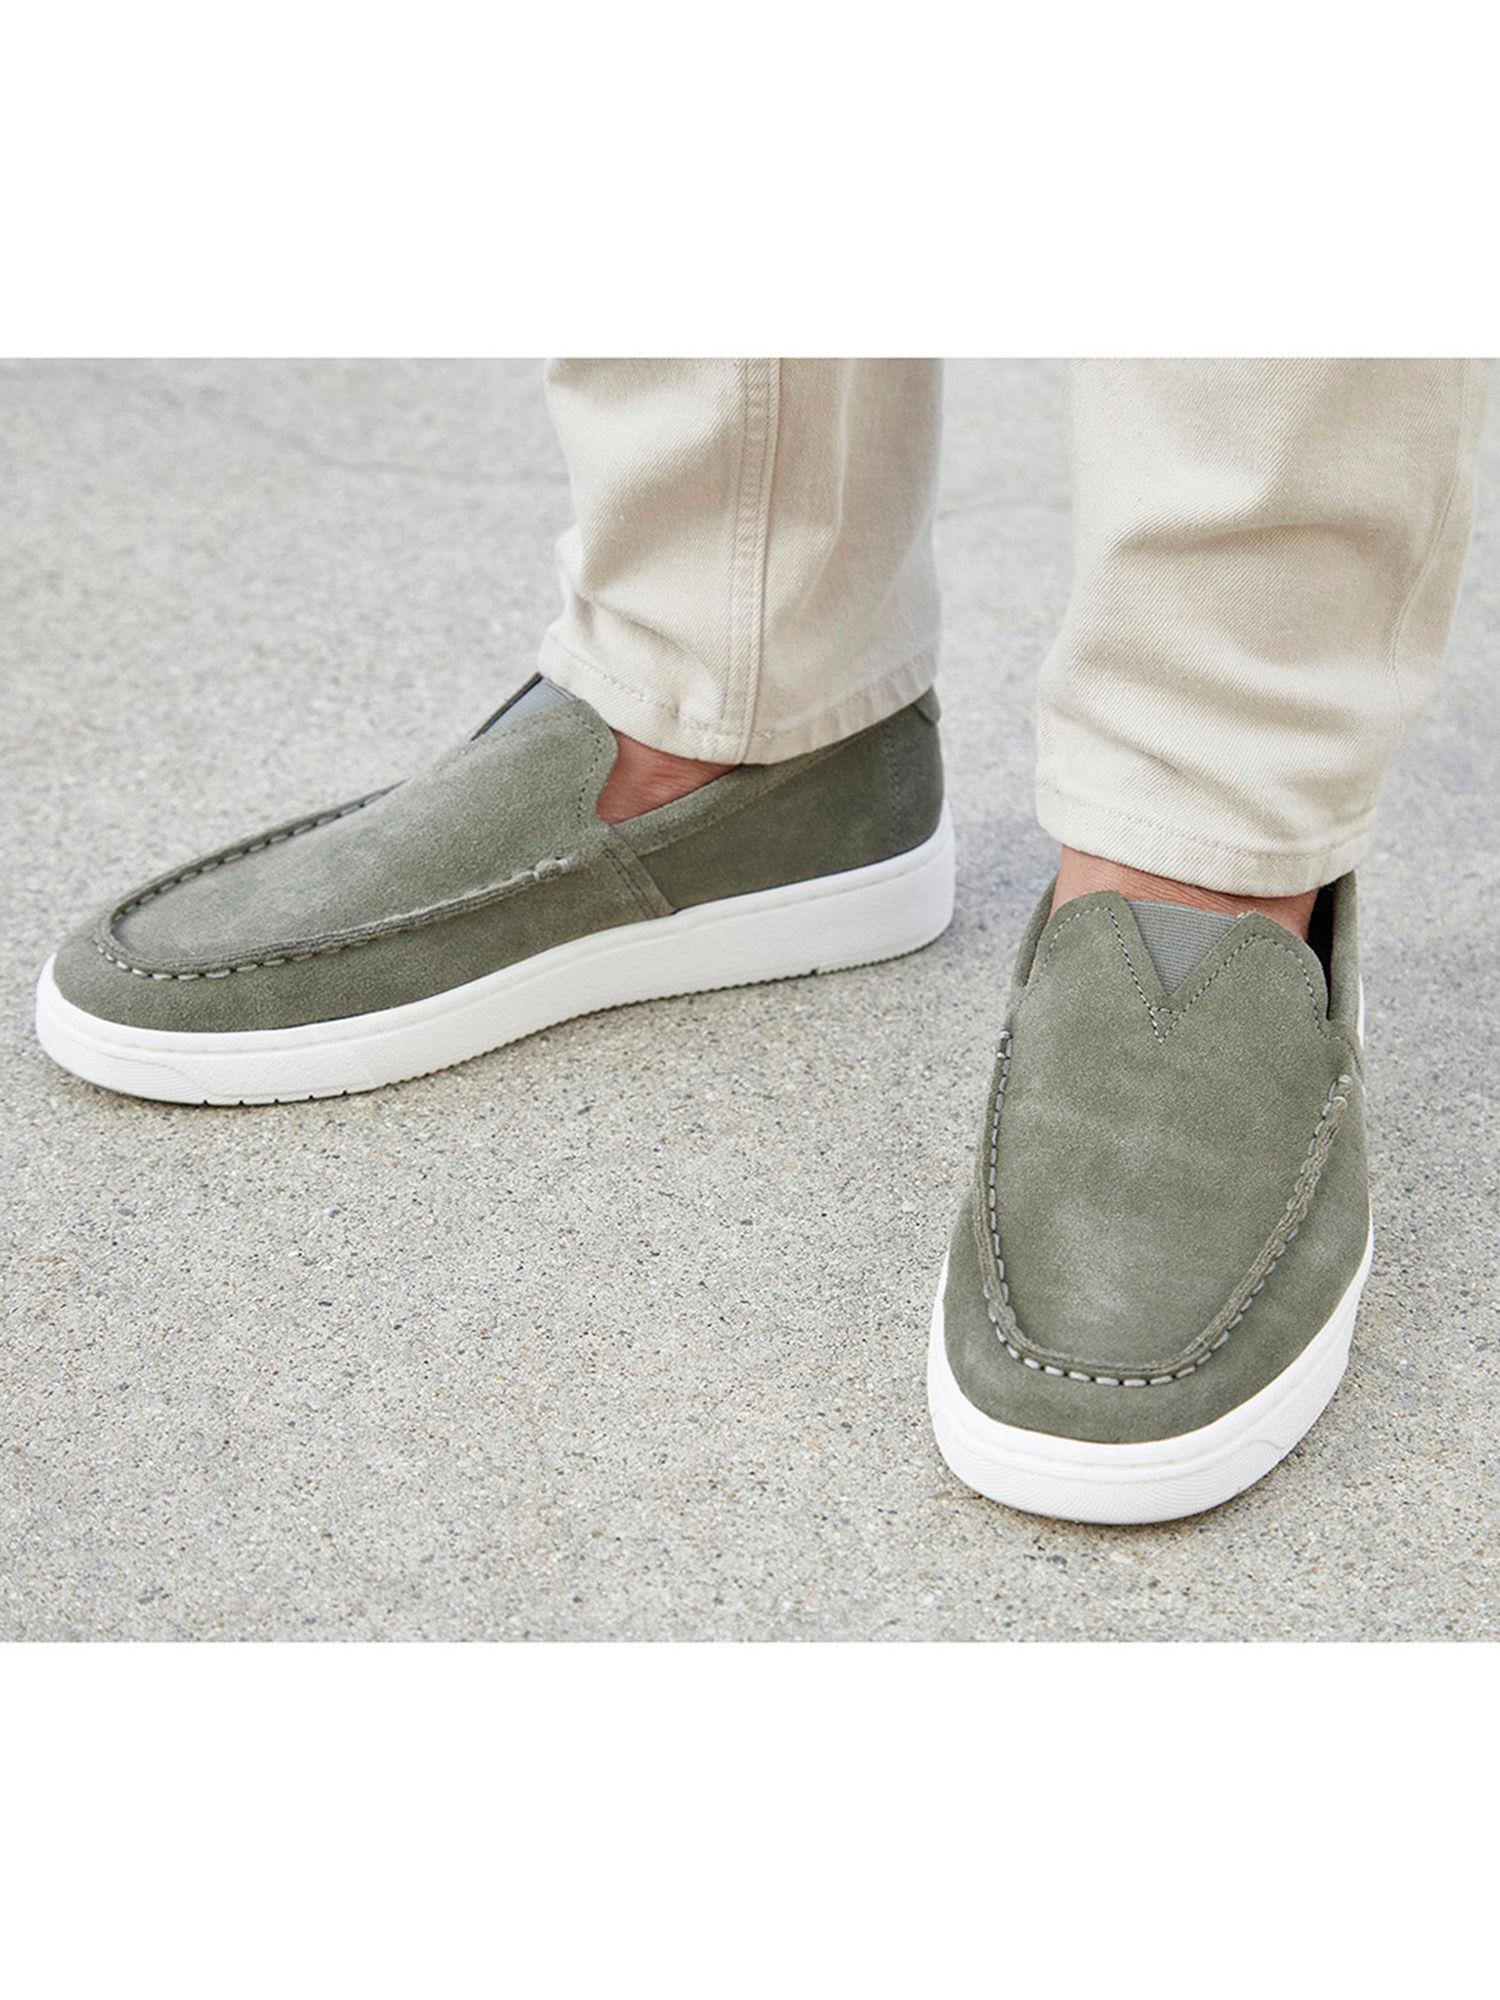 trvl lite suede leather grey loafers